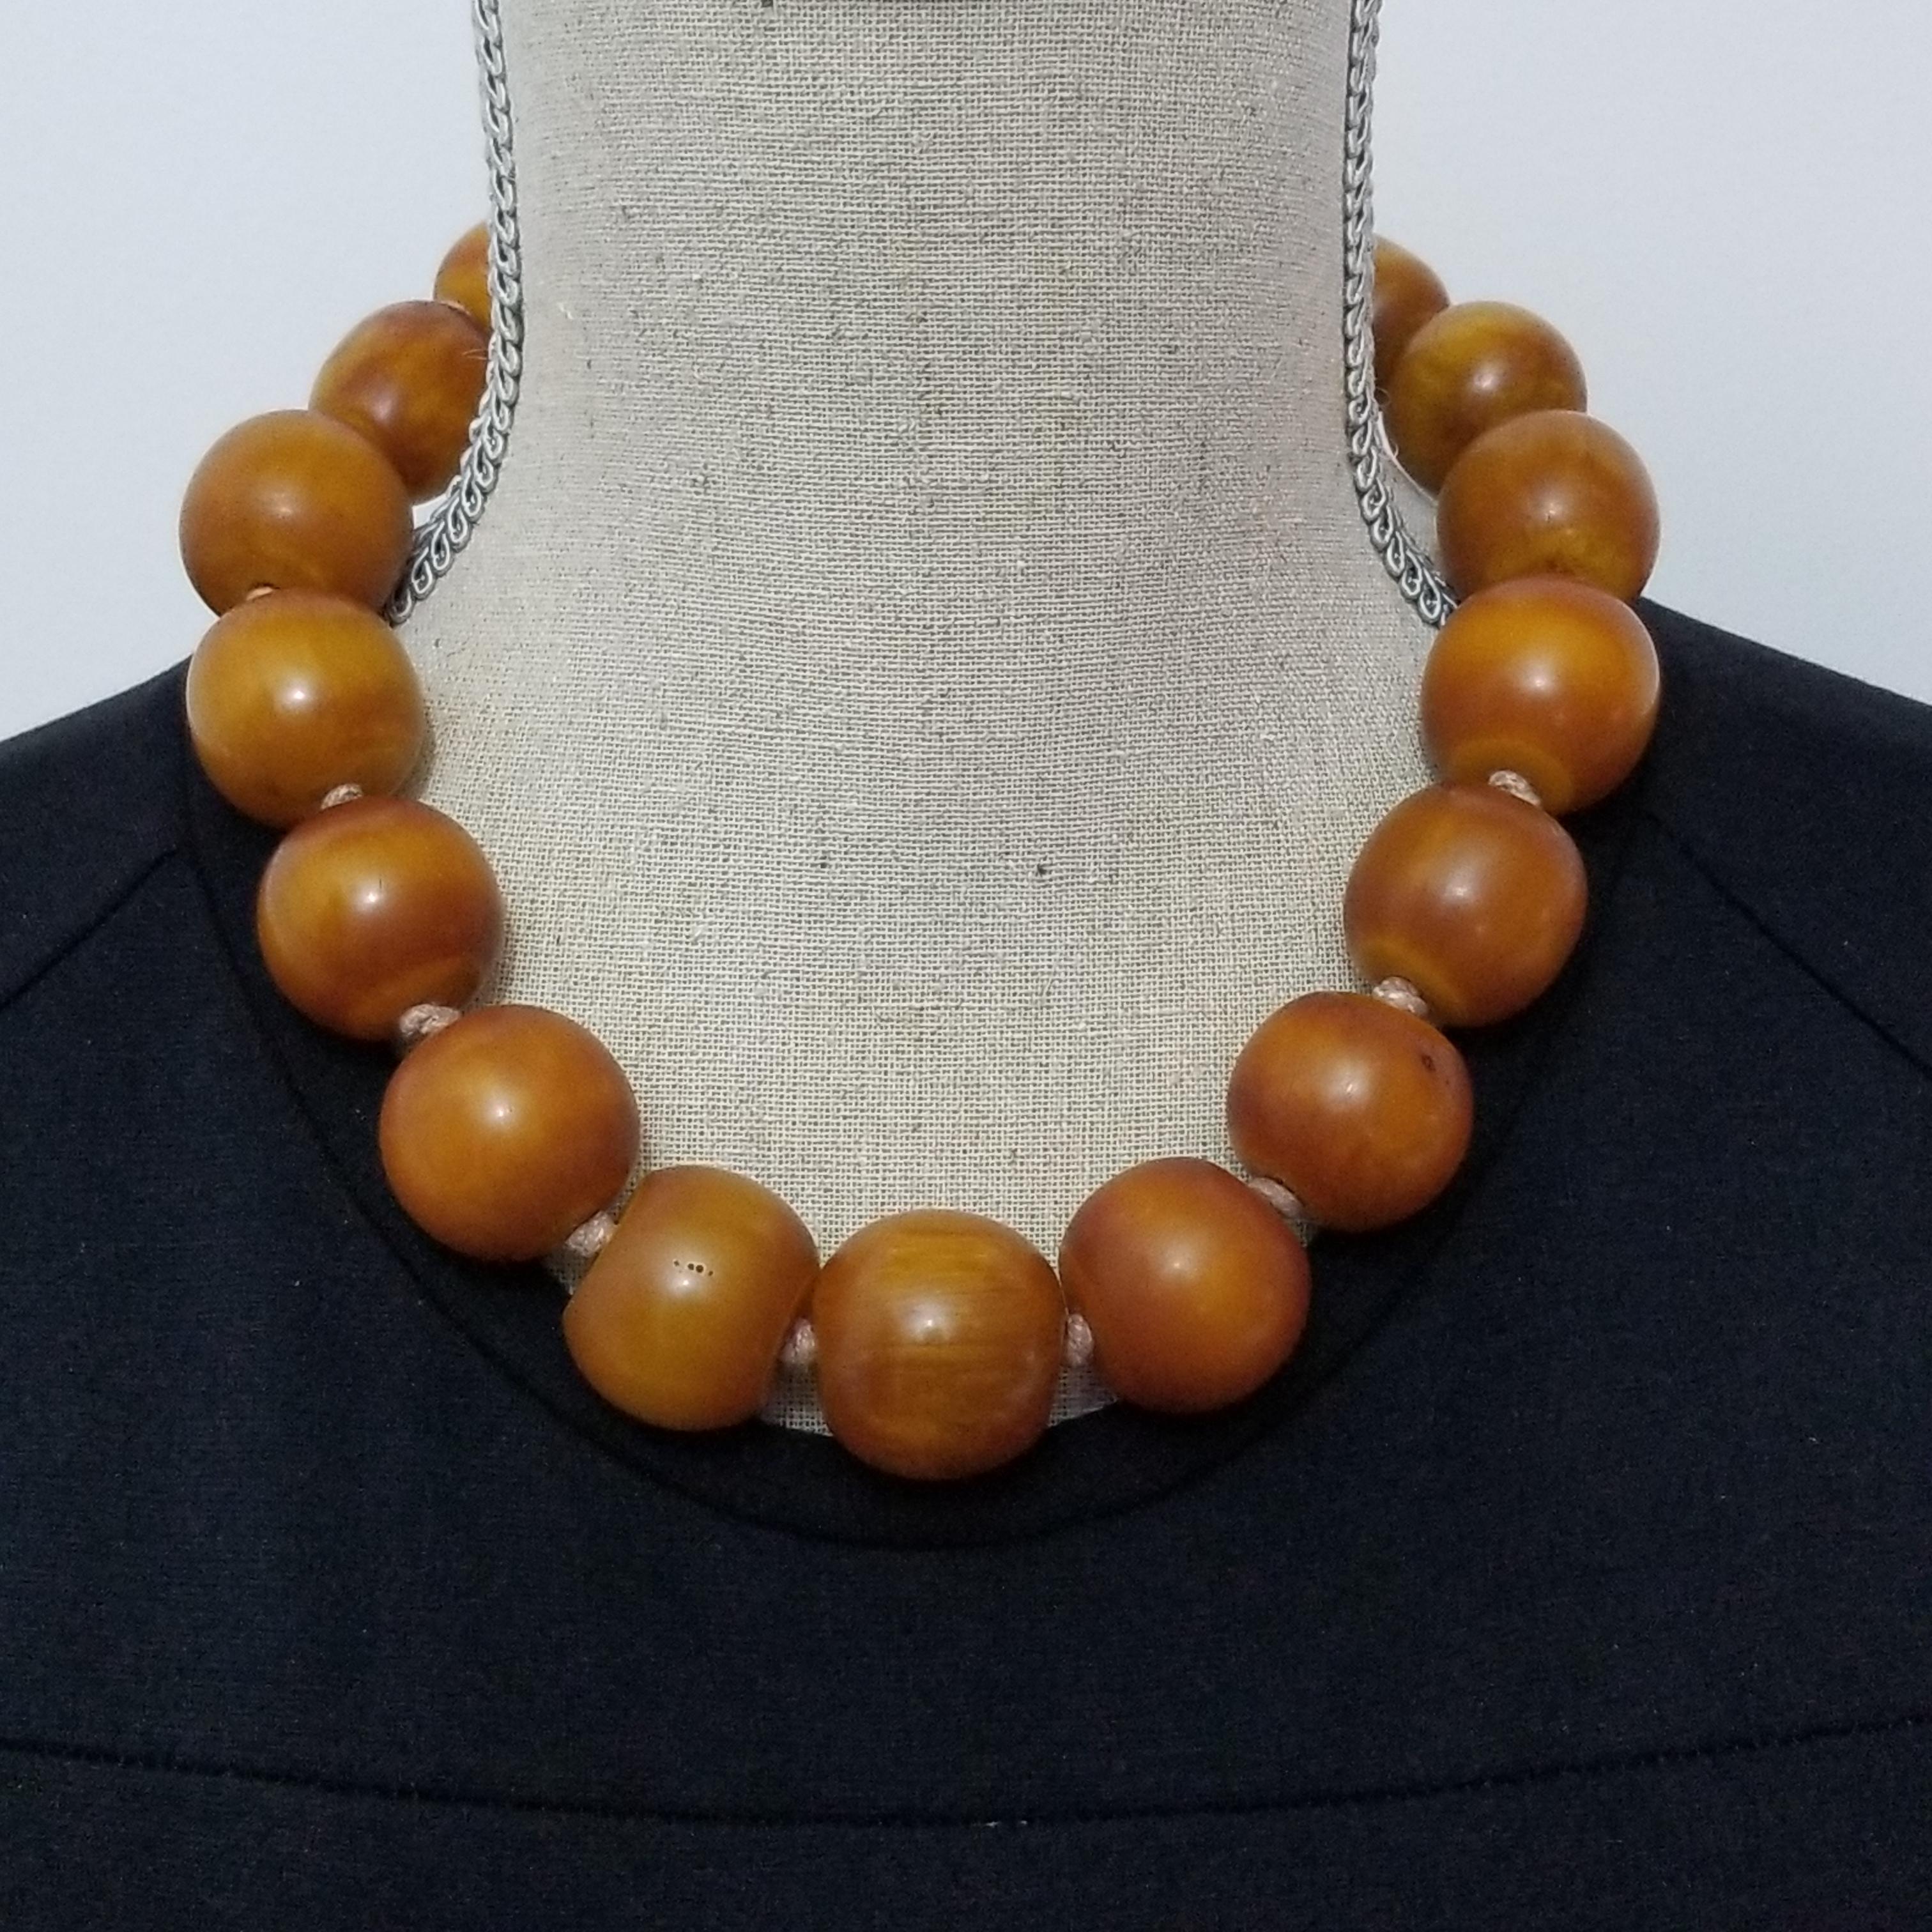 Bold & bright! This vintage bakelite necklace features large, chunky, graduated butterscotch bakelite beads on a sturdy vintage knotted string. A large 14K gold spring ring clasp is as eye catching as the beads themselves. Excellent condition and